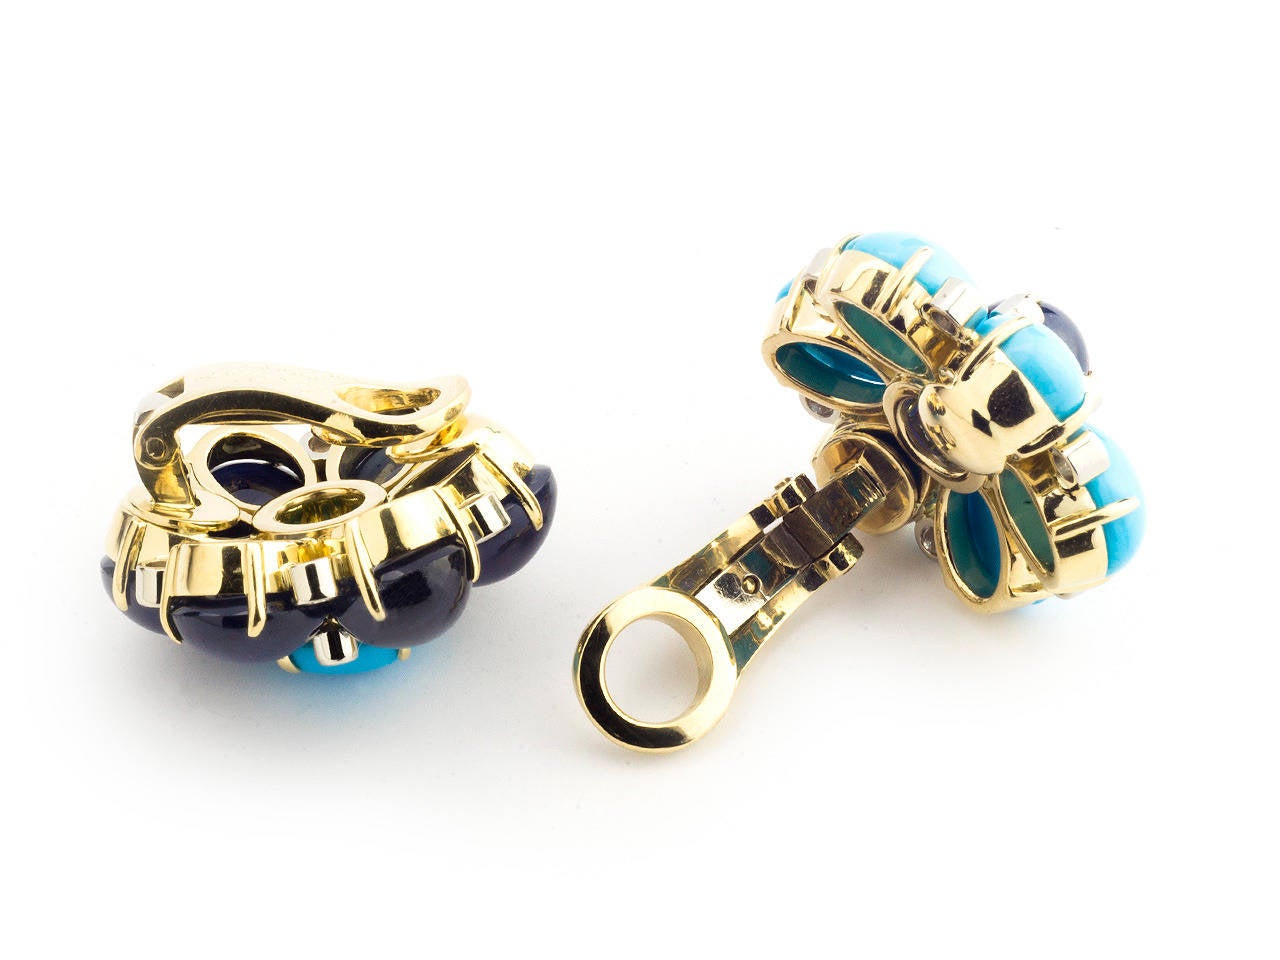 18k gold earclips set with turquoise and unheated sapphire cabochons, accented by diamonds. Sapphire weights approximately 30 carats. Signed Aletto Bros. USA.